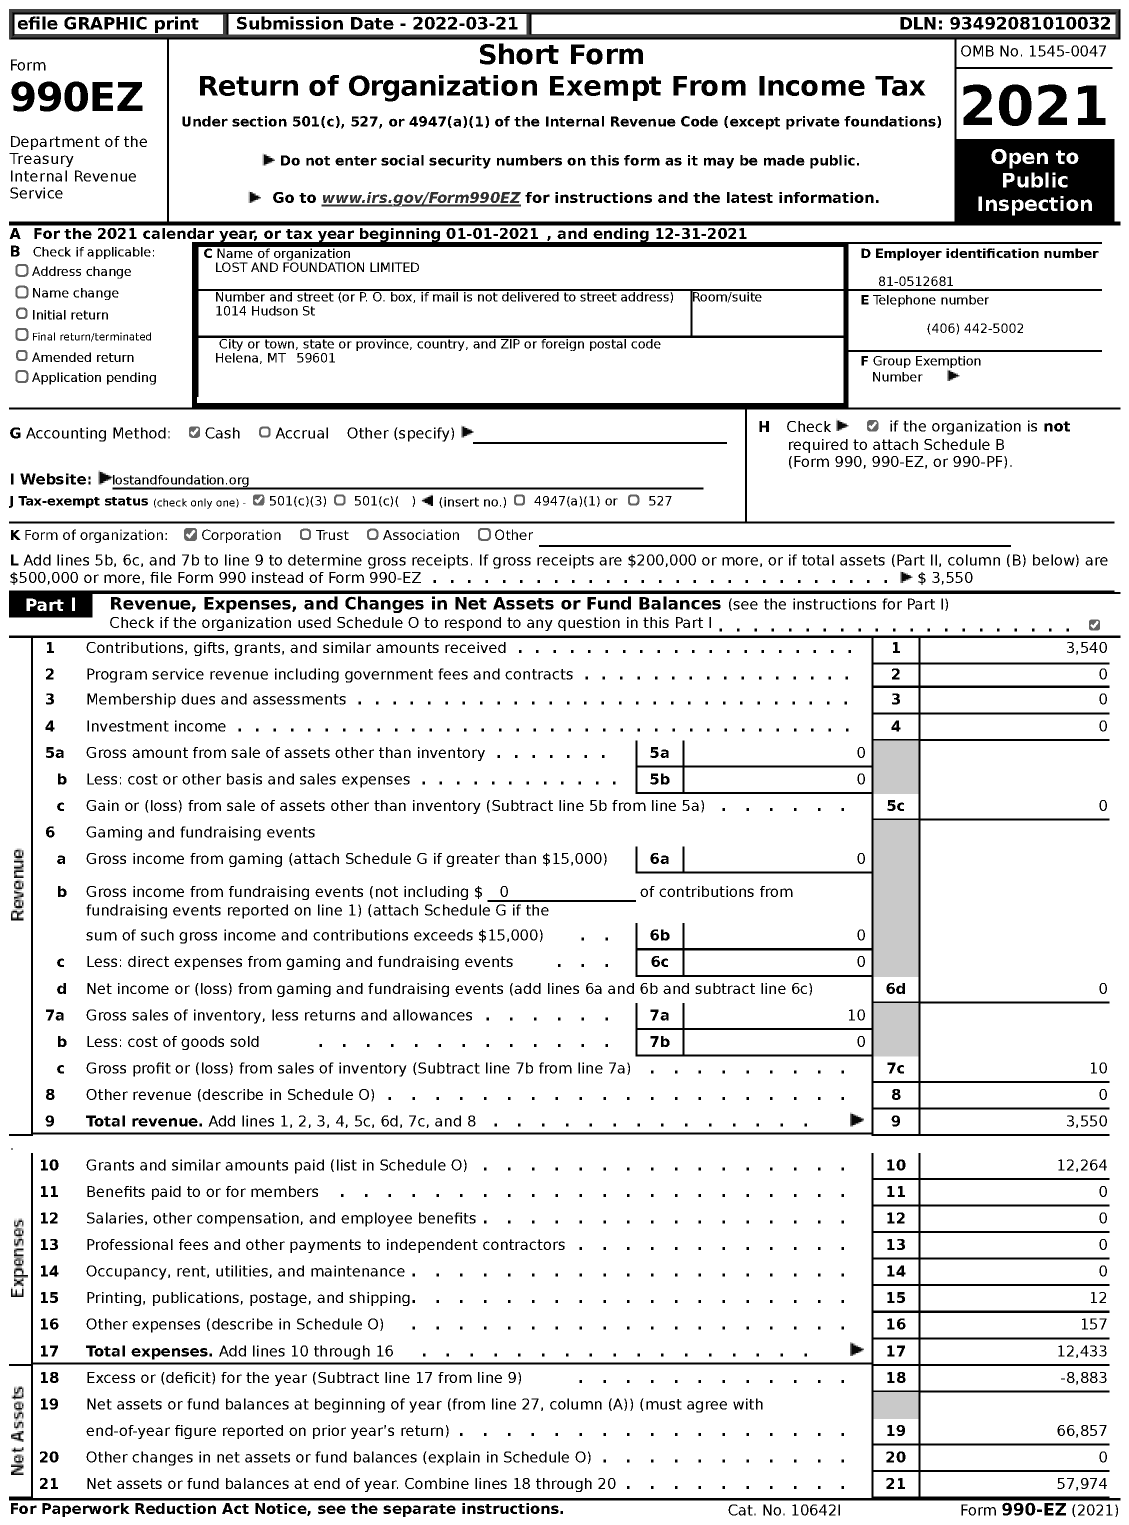 Image of first page of 2021 Form 990EZ for Lost and Foundation Limited